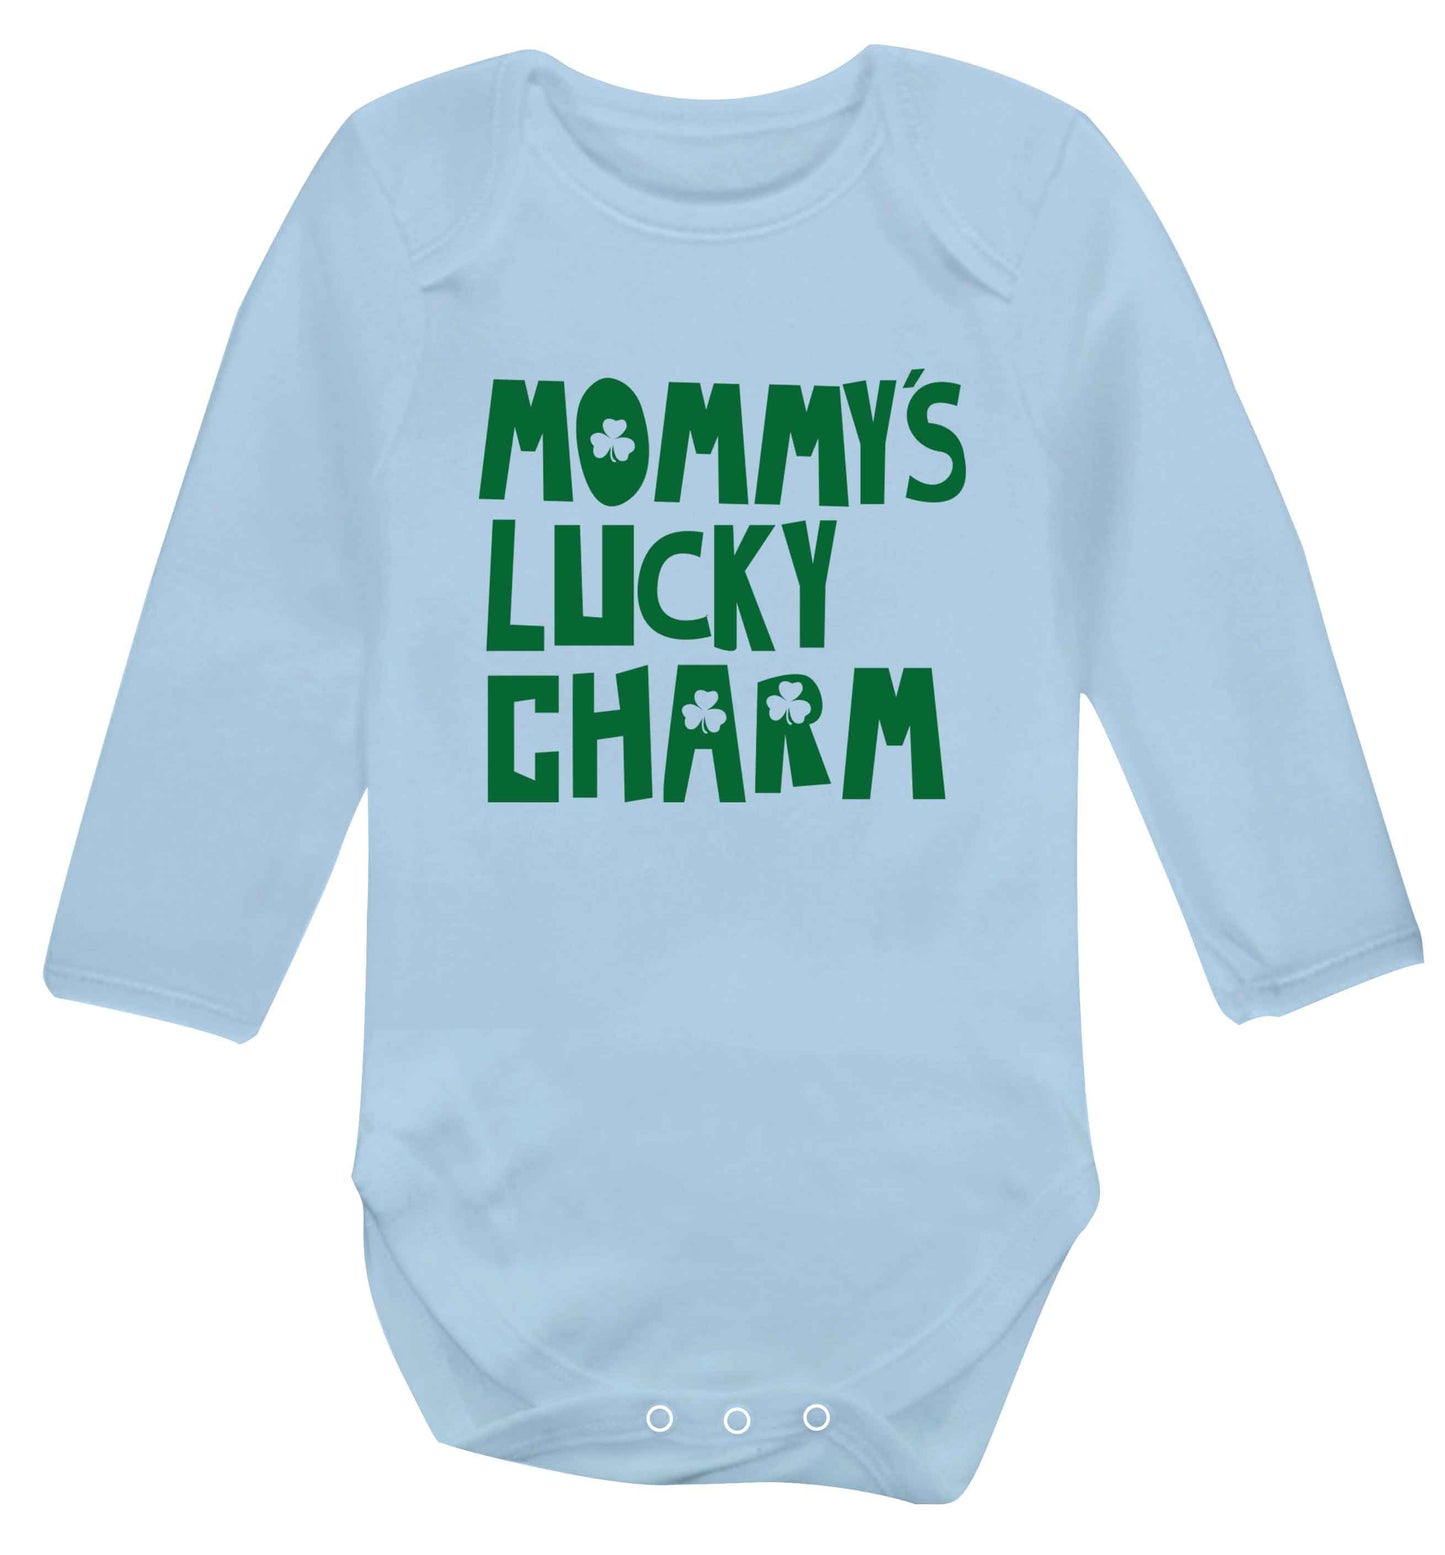 Mommy's lucky charm baby vest long sleeved pale blue 6-12 months